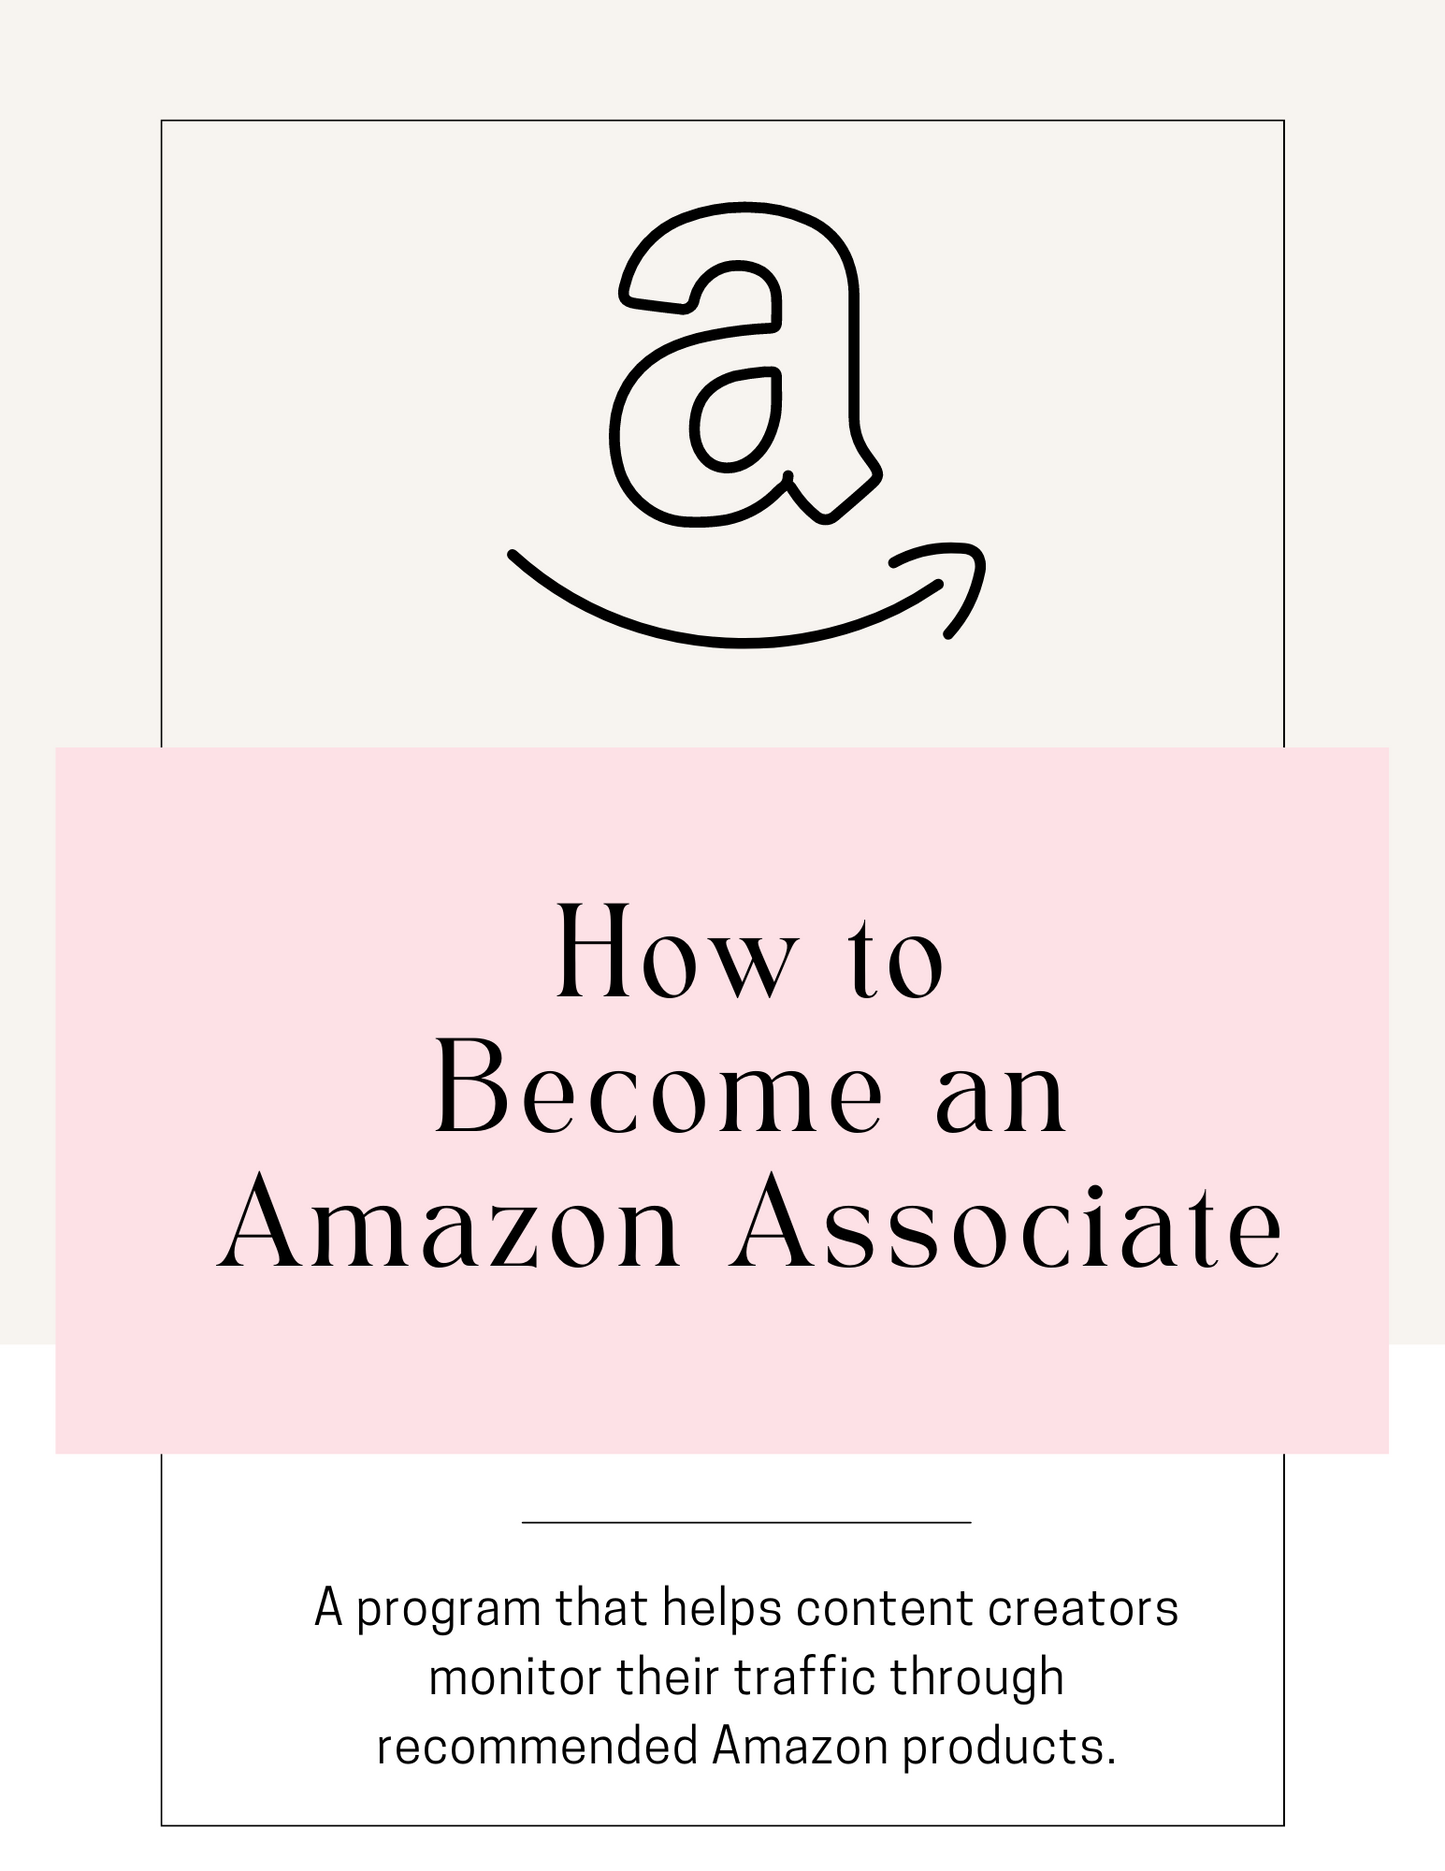 COURSE: How to Become an Amazon Associate